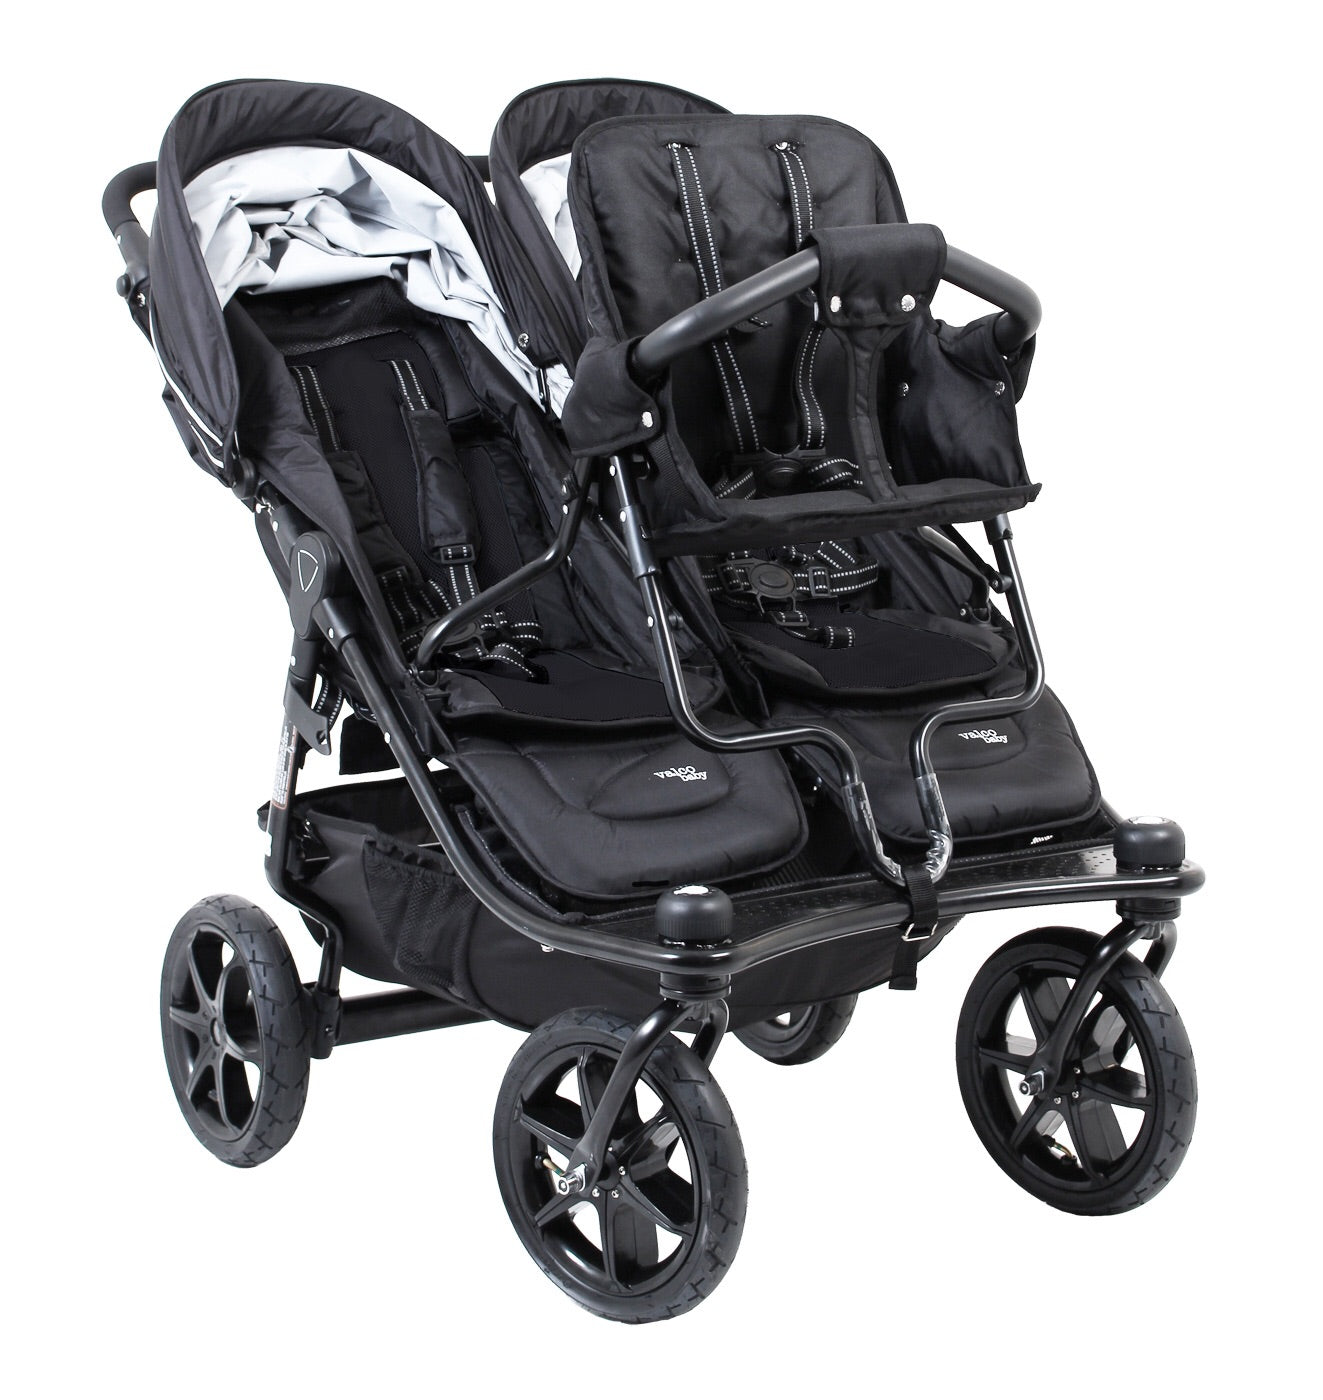 joey seat for stroller